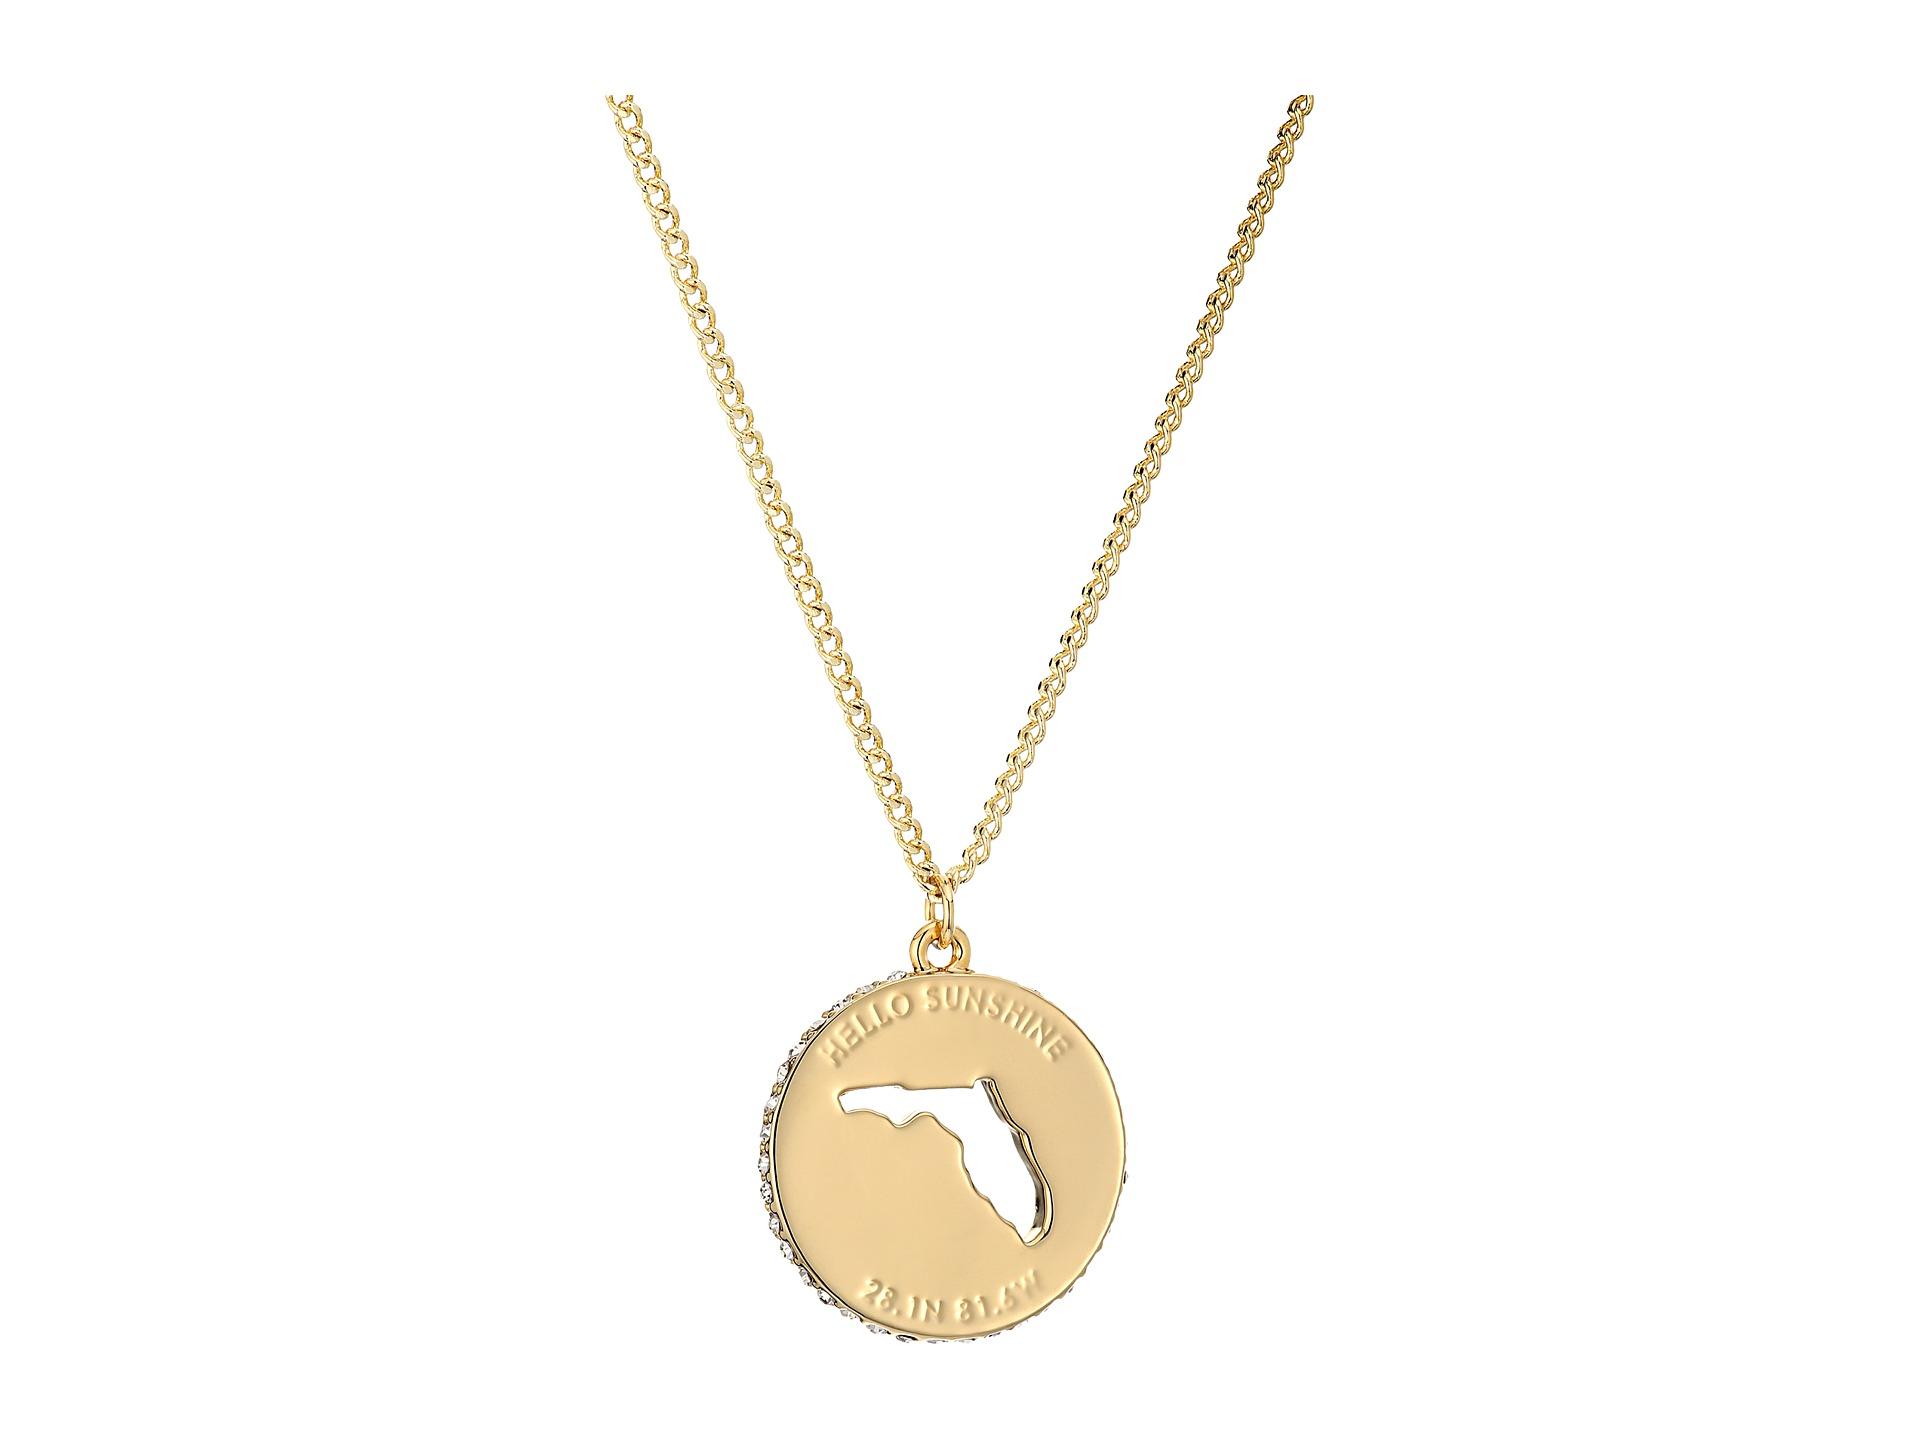 Lyst - Kate Spade New York State Of Mind Florida Pendant Necklace in